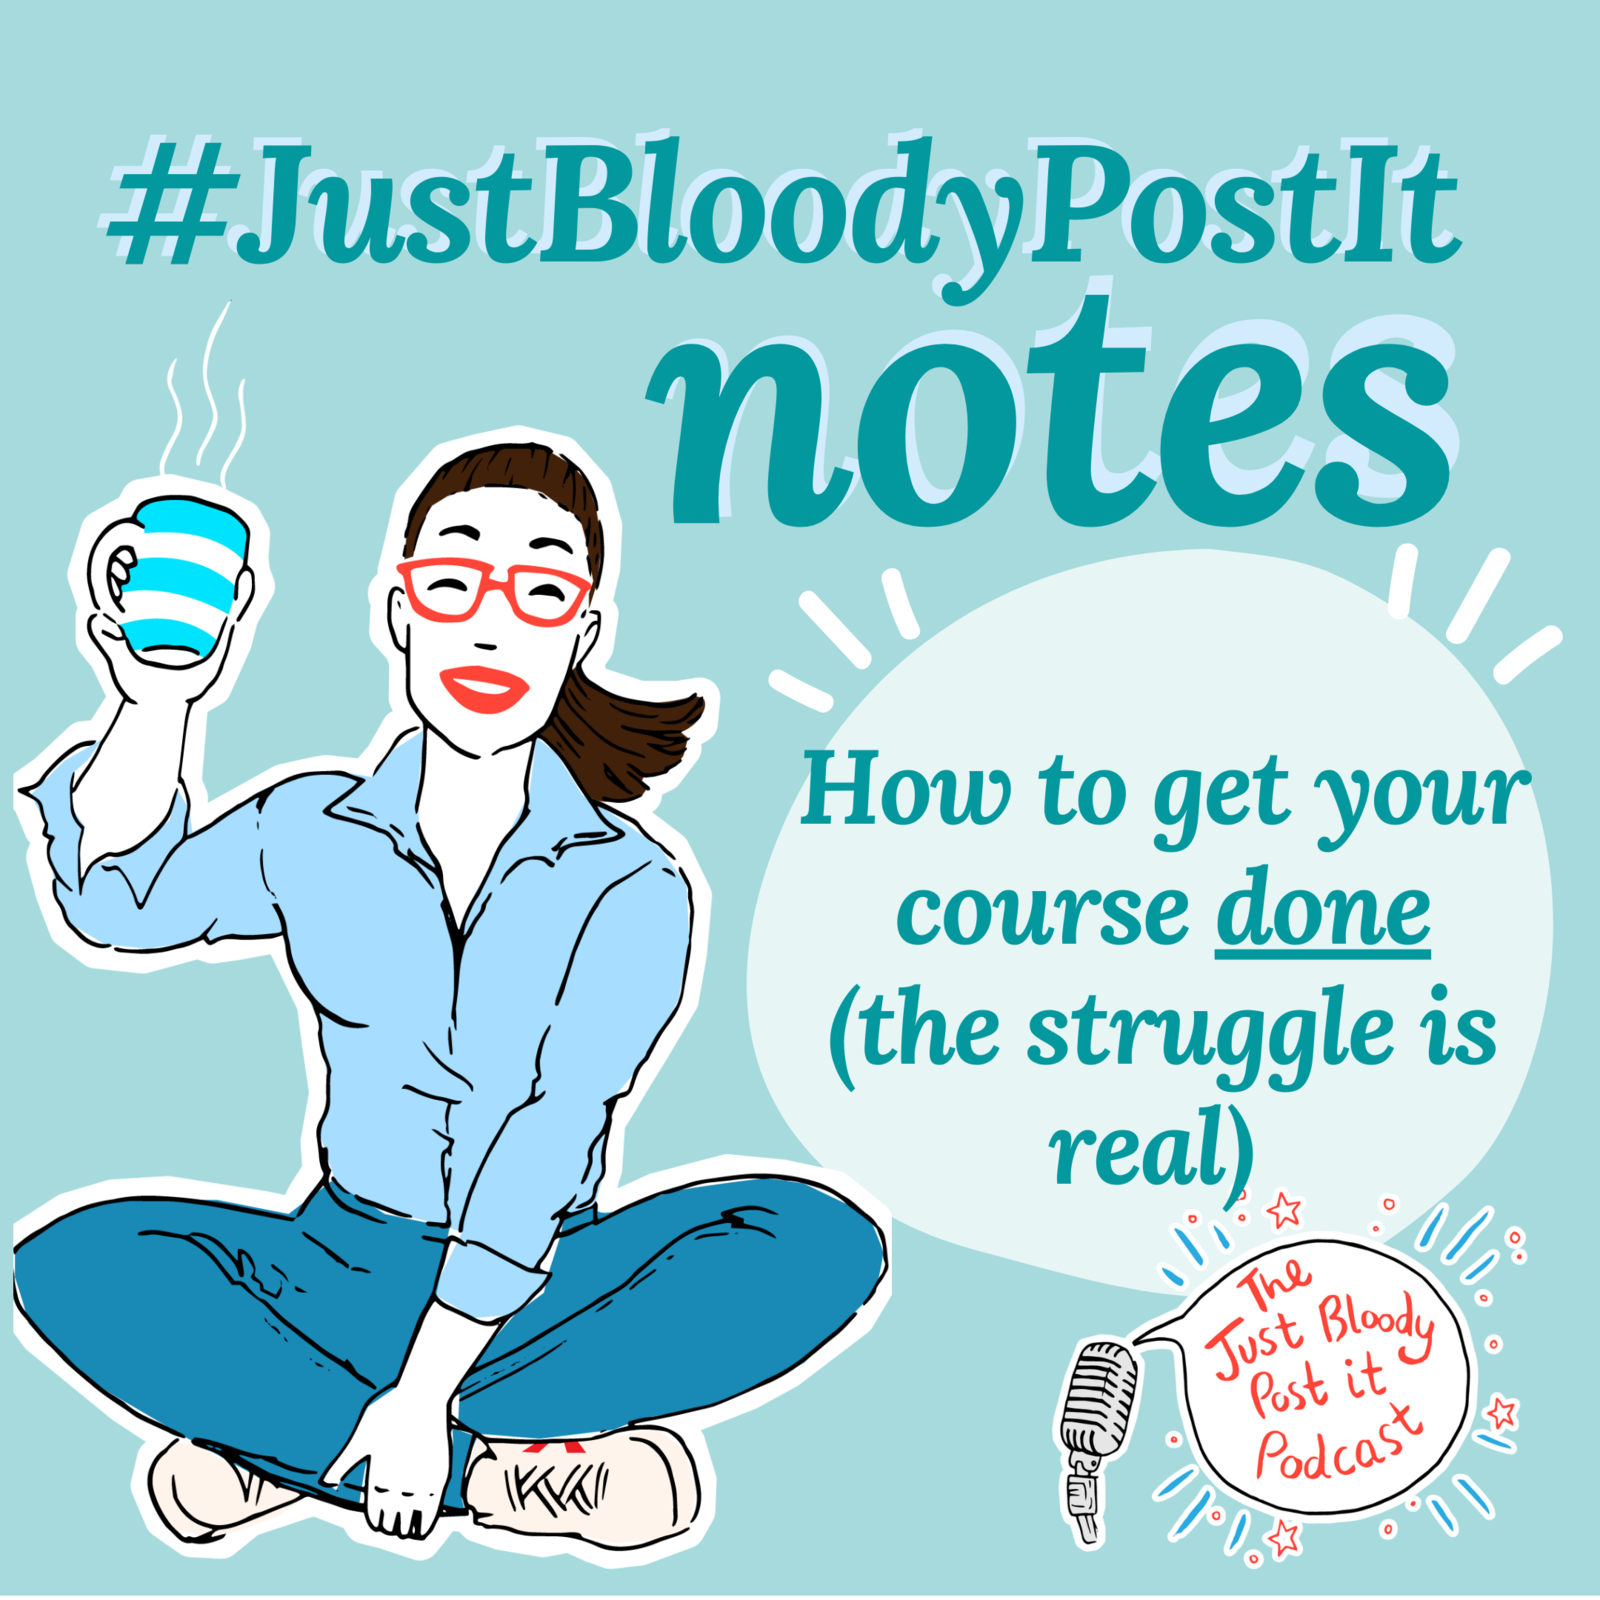 S3 Ep56: How to get your course done, a #JustBloodyPostIt Note